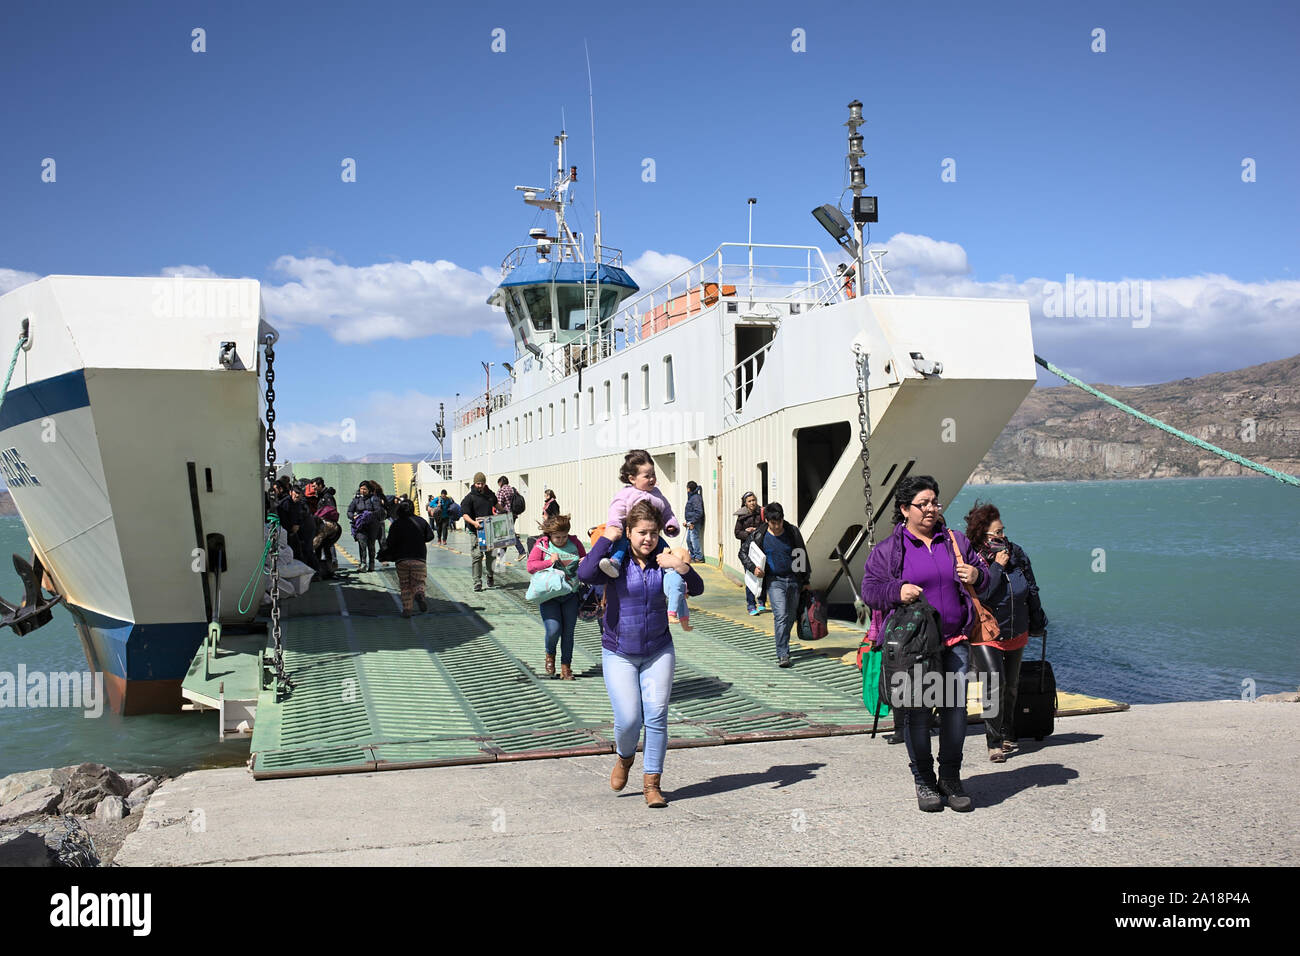 PUERTO IBANEZ, CHILE - FEBRUARY 20, 2016: Unidentified people disembarking ferry from Chile Chico in Puerto Ibanez in Chile Stock Photo